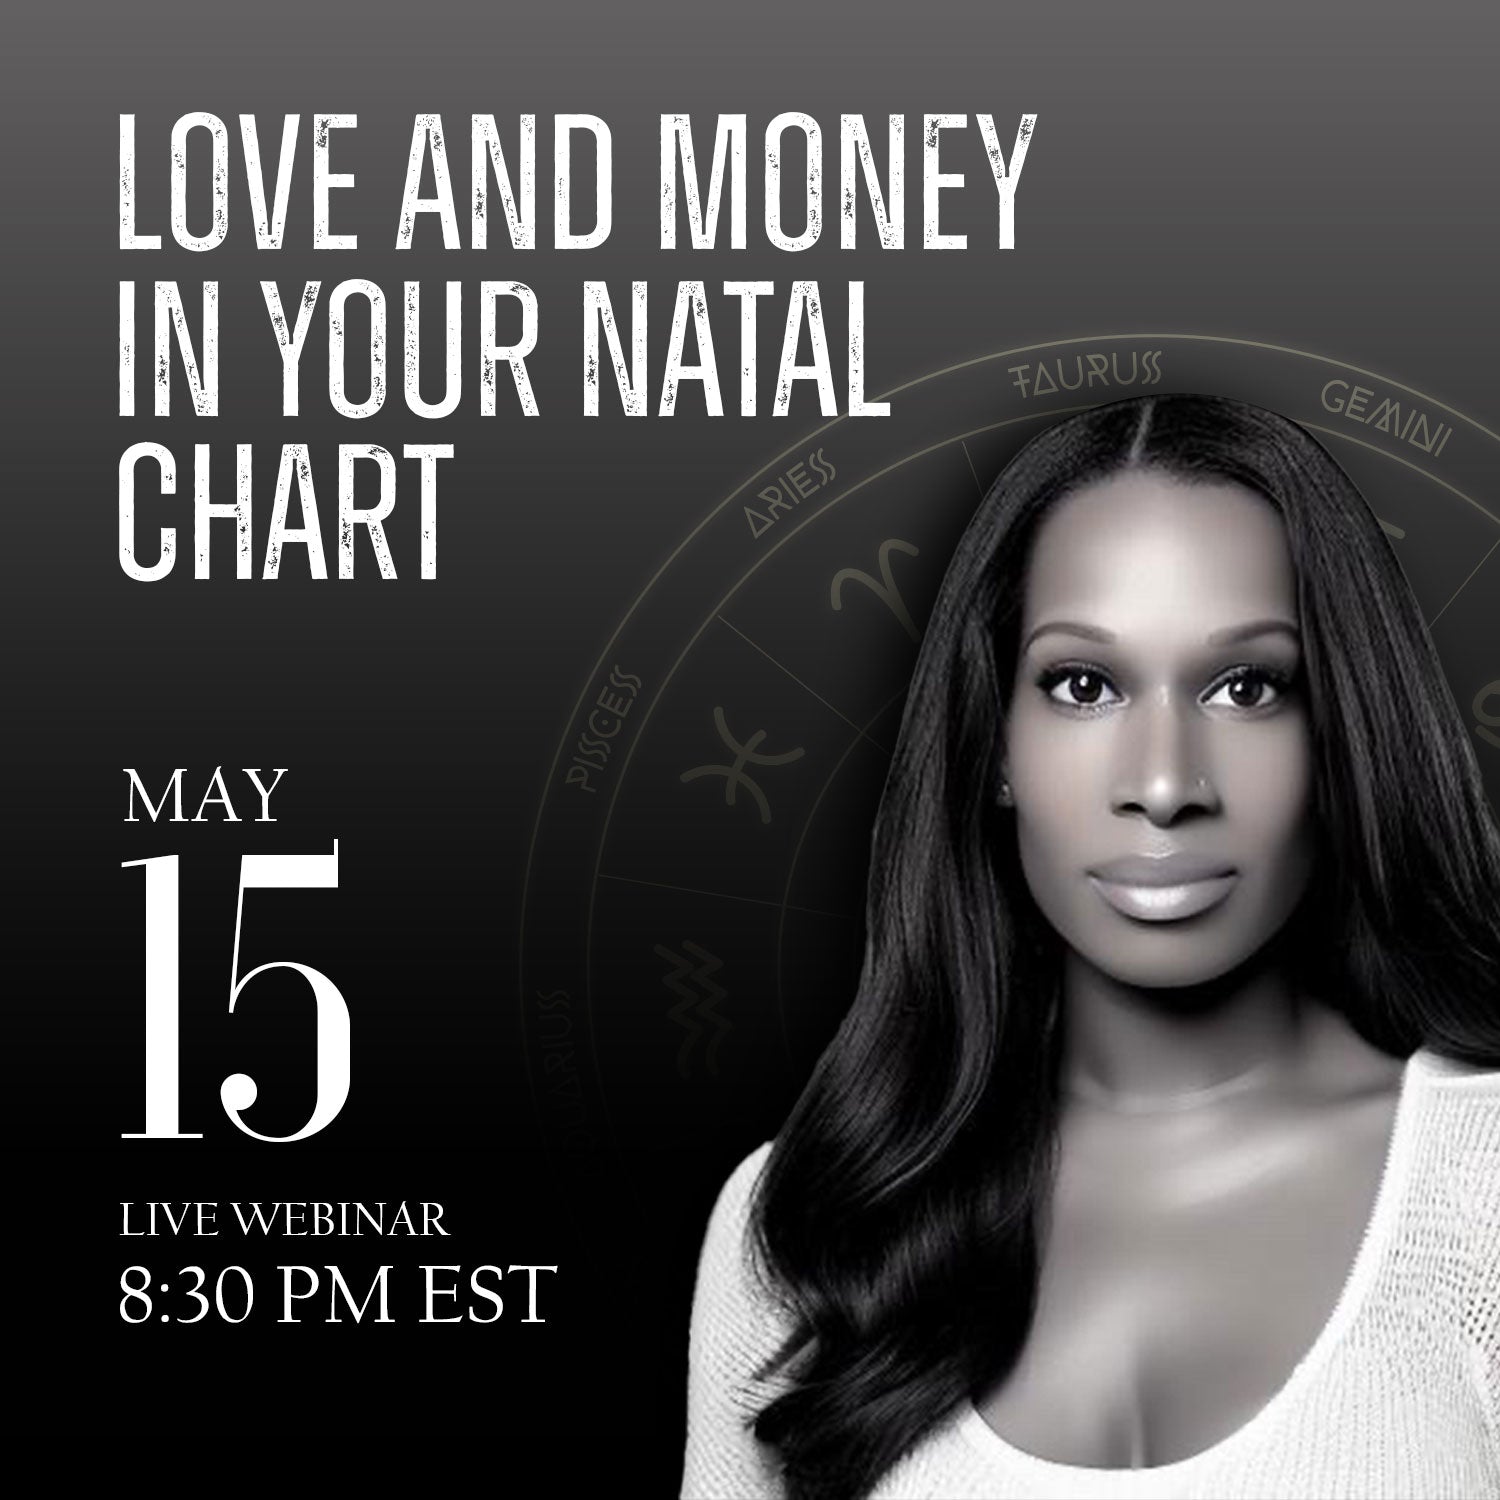 Love and Money in Your Natal Chart - Live Webinar